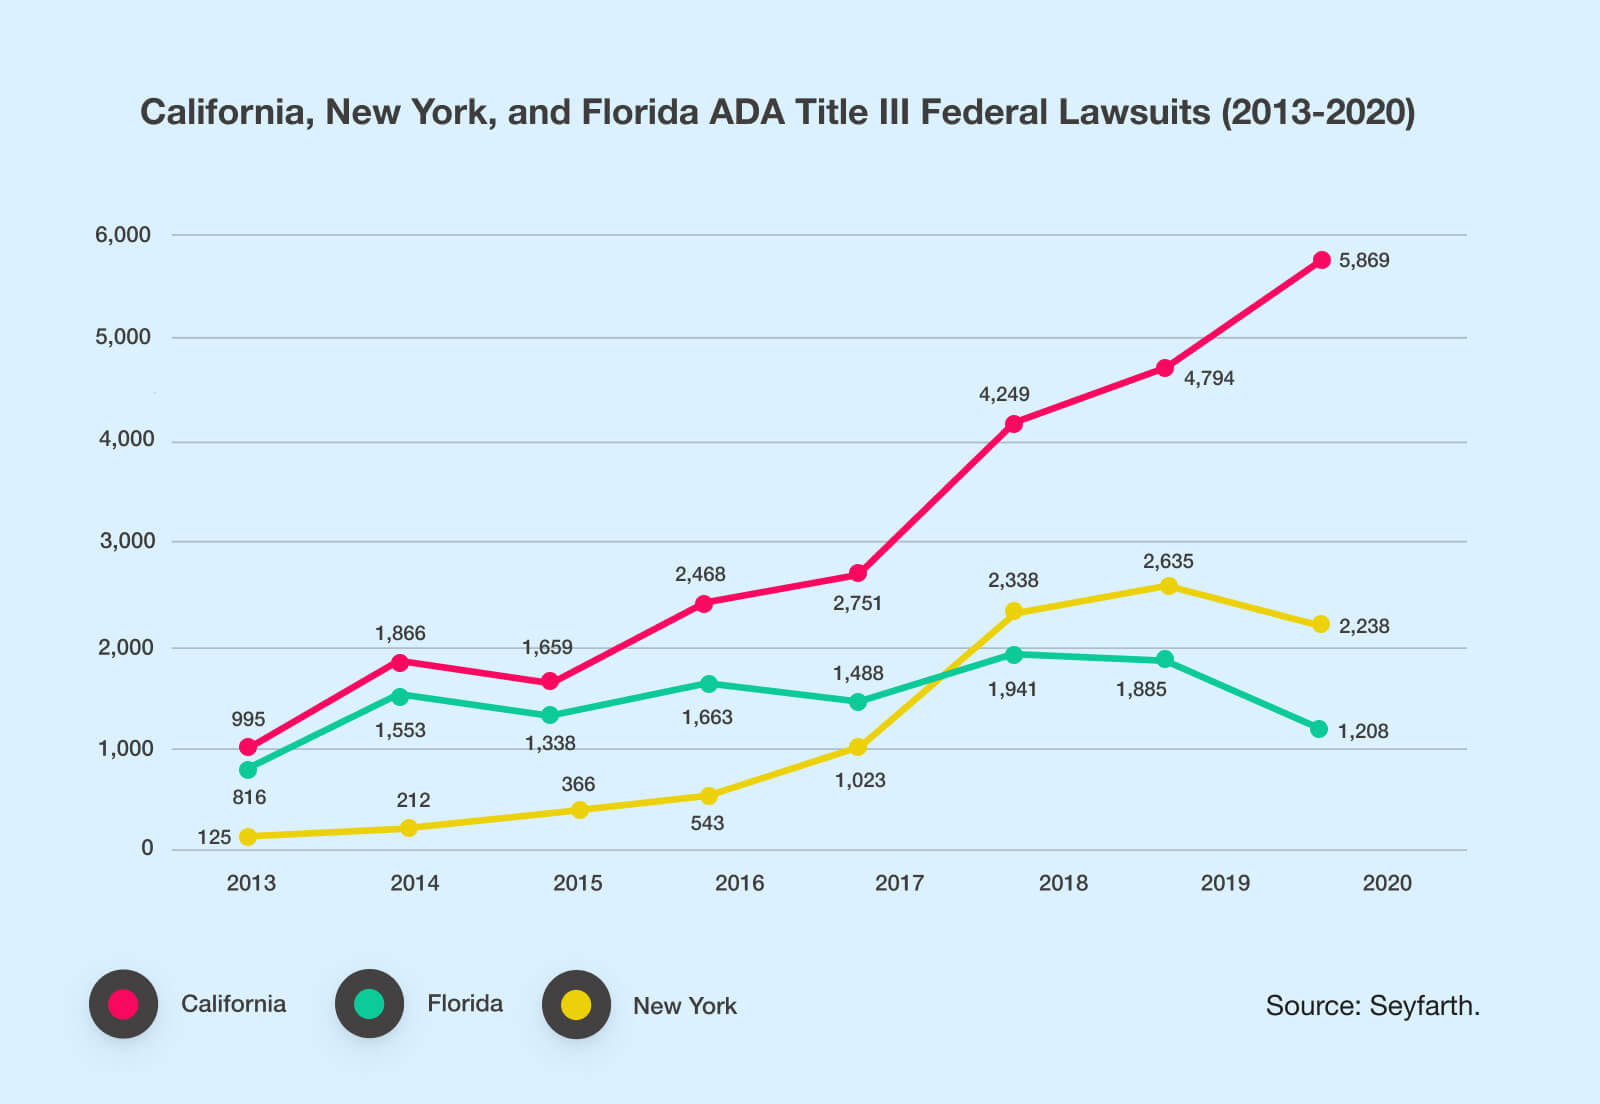 Graph shows California ADA Title III Federal lawsuits rise from 125 in 2013 to 2238 in 2020.